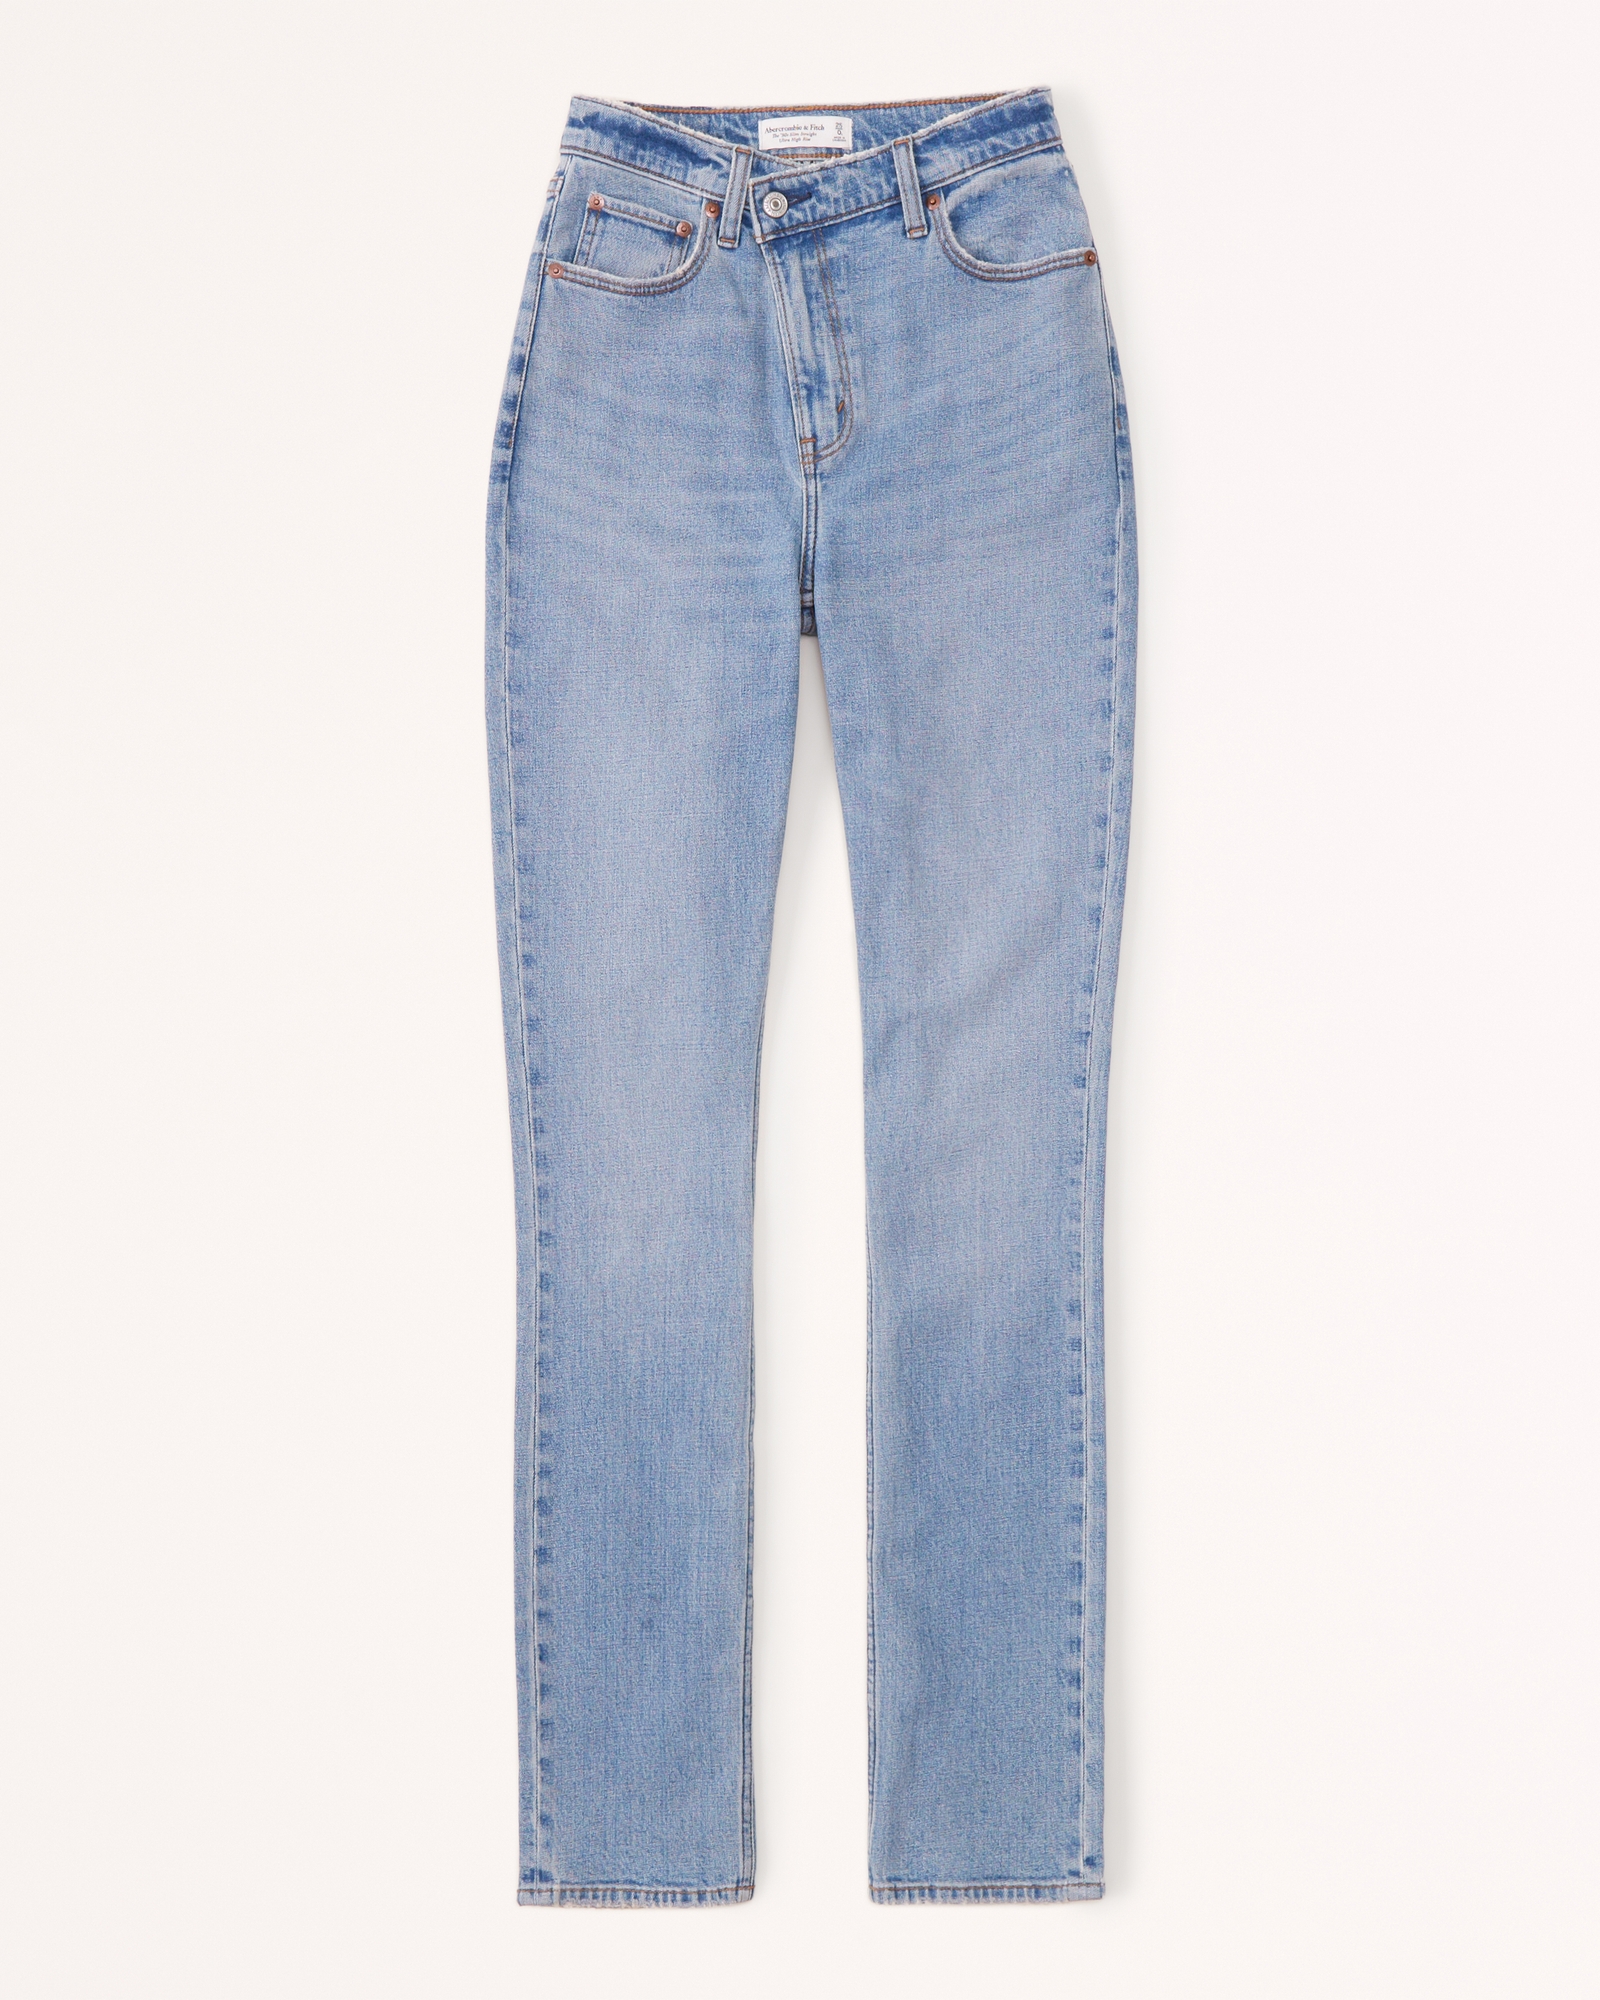 Obsessed: A&F '90s Ultra High-Rise Straight Jeans (A Review) - The Mom Edit